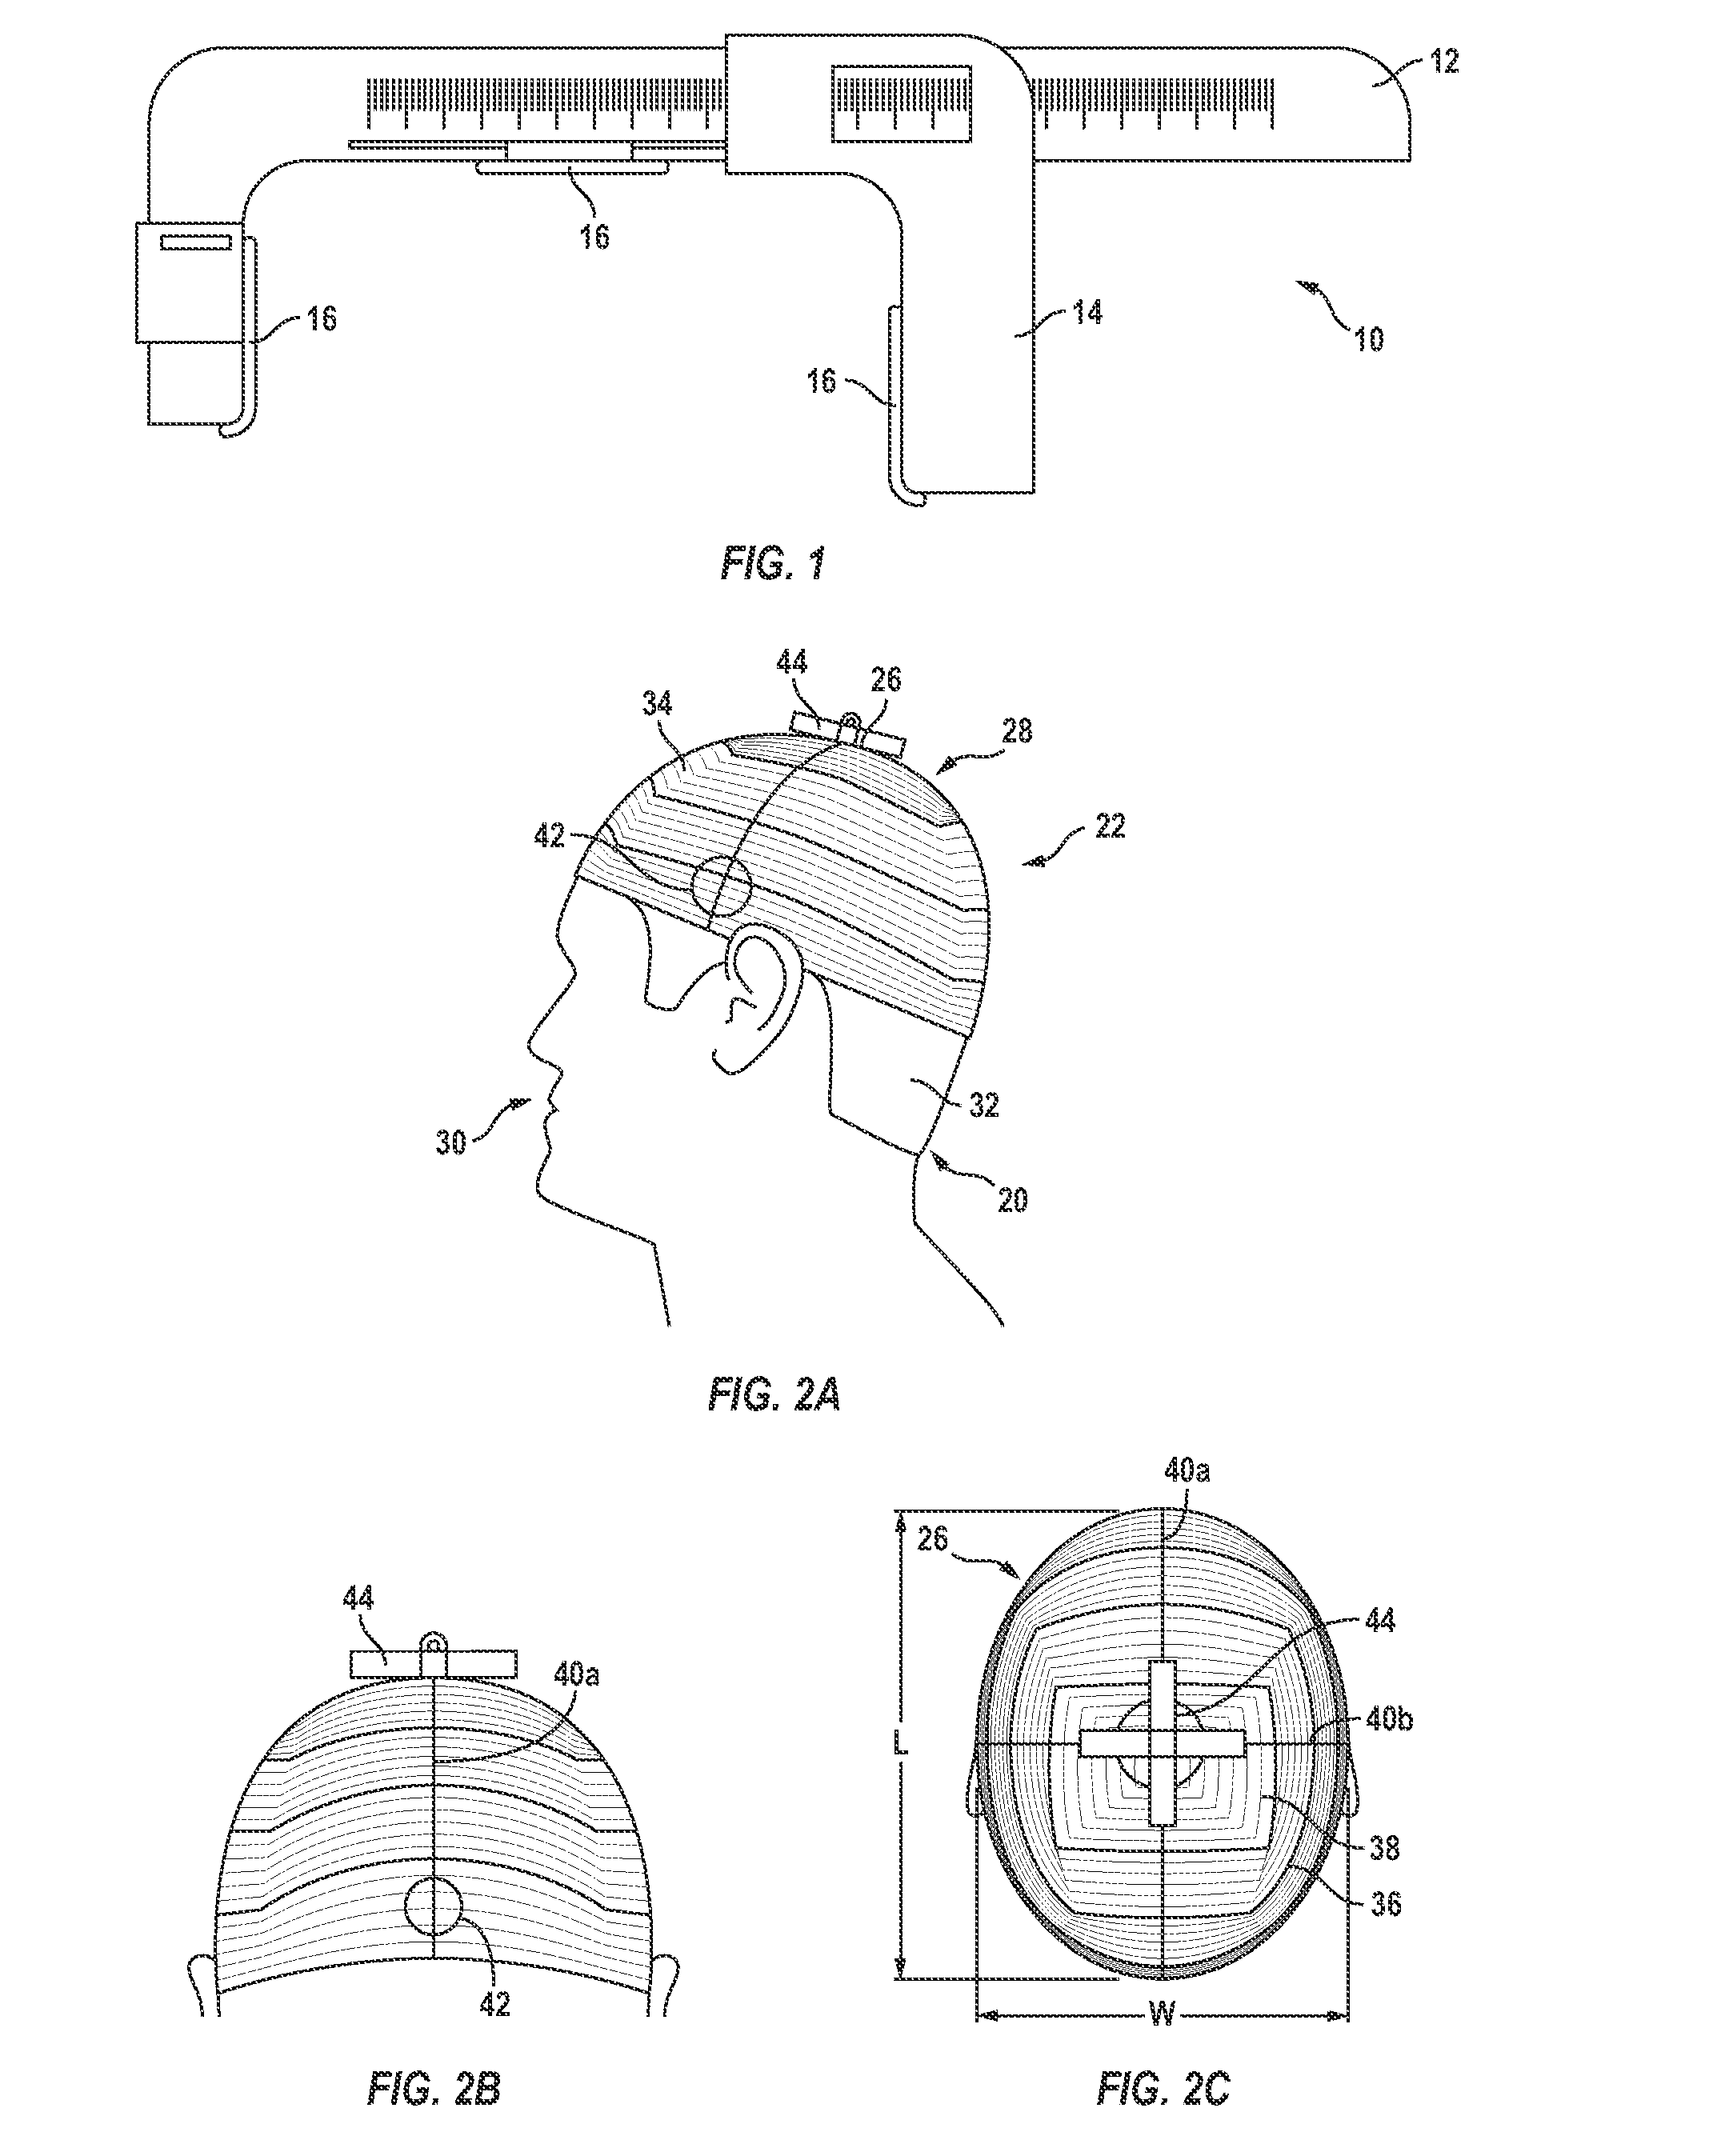 System and method for custom forming a protective helmet for a customer's head